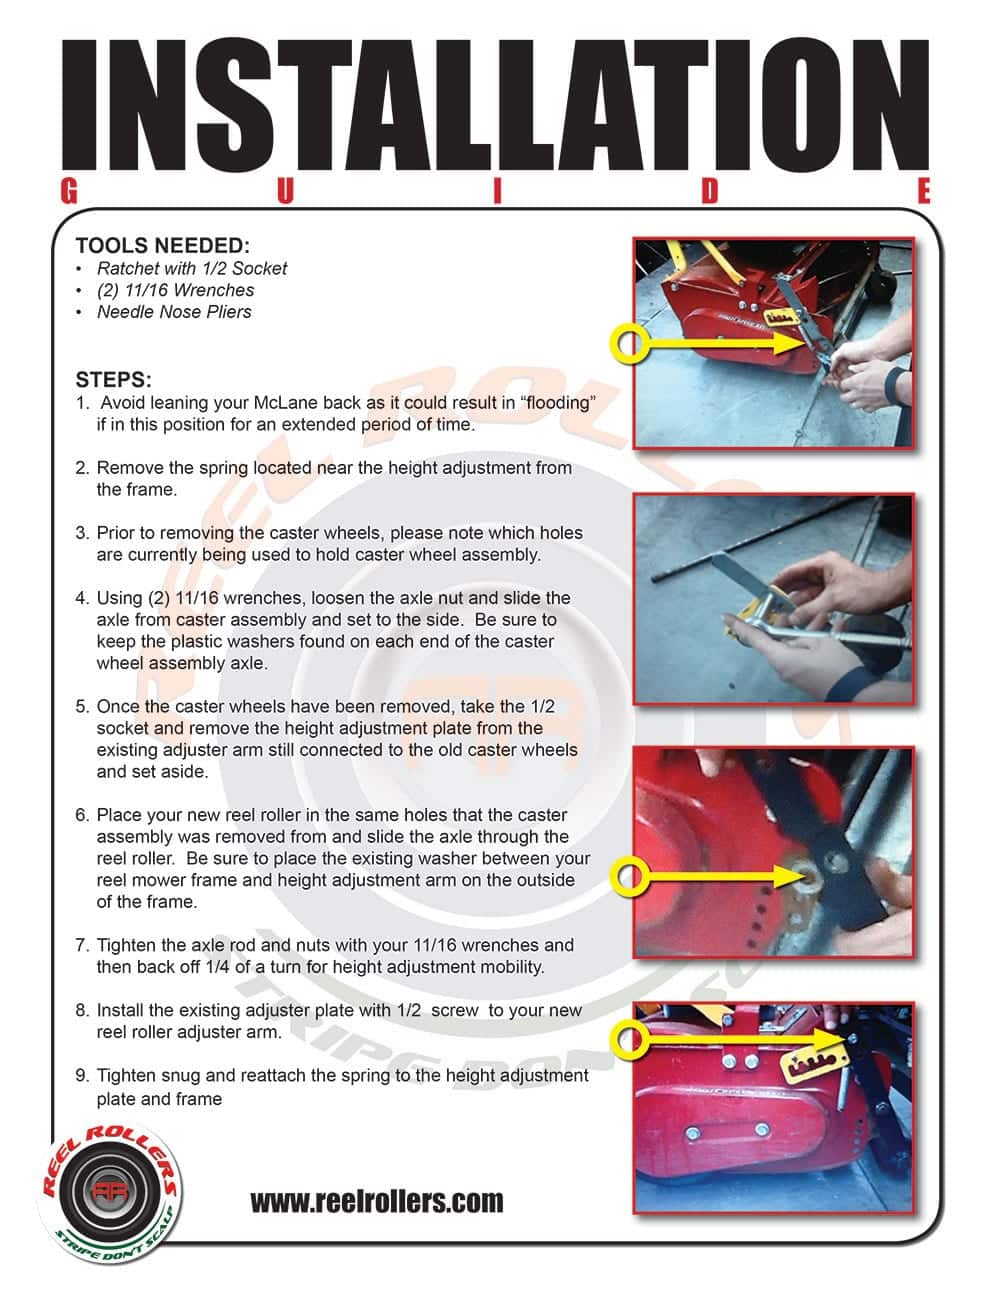 McLane Front Roller Instructions